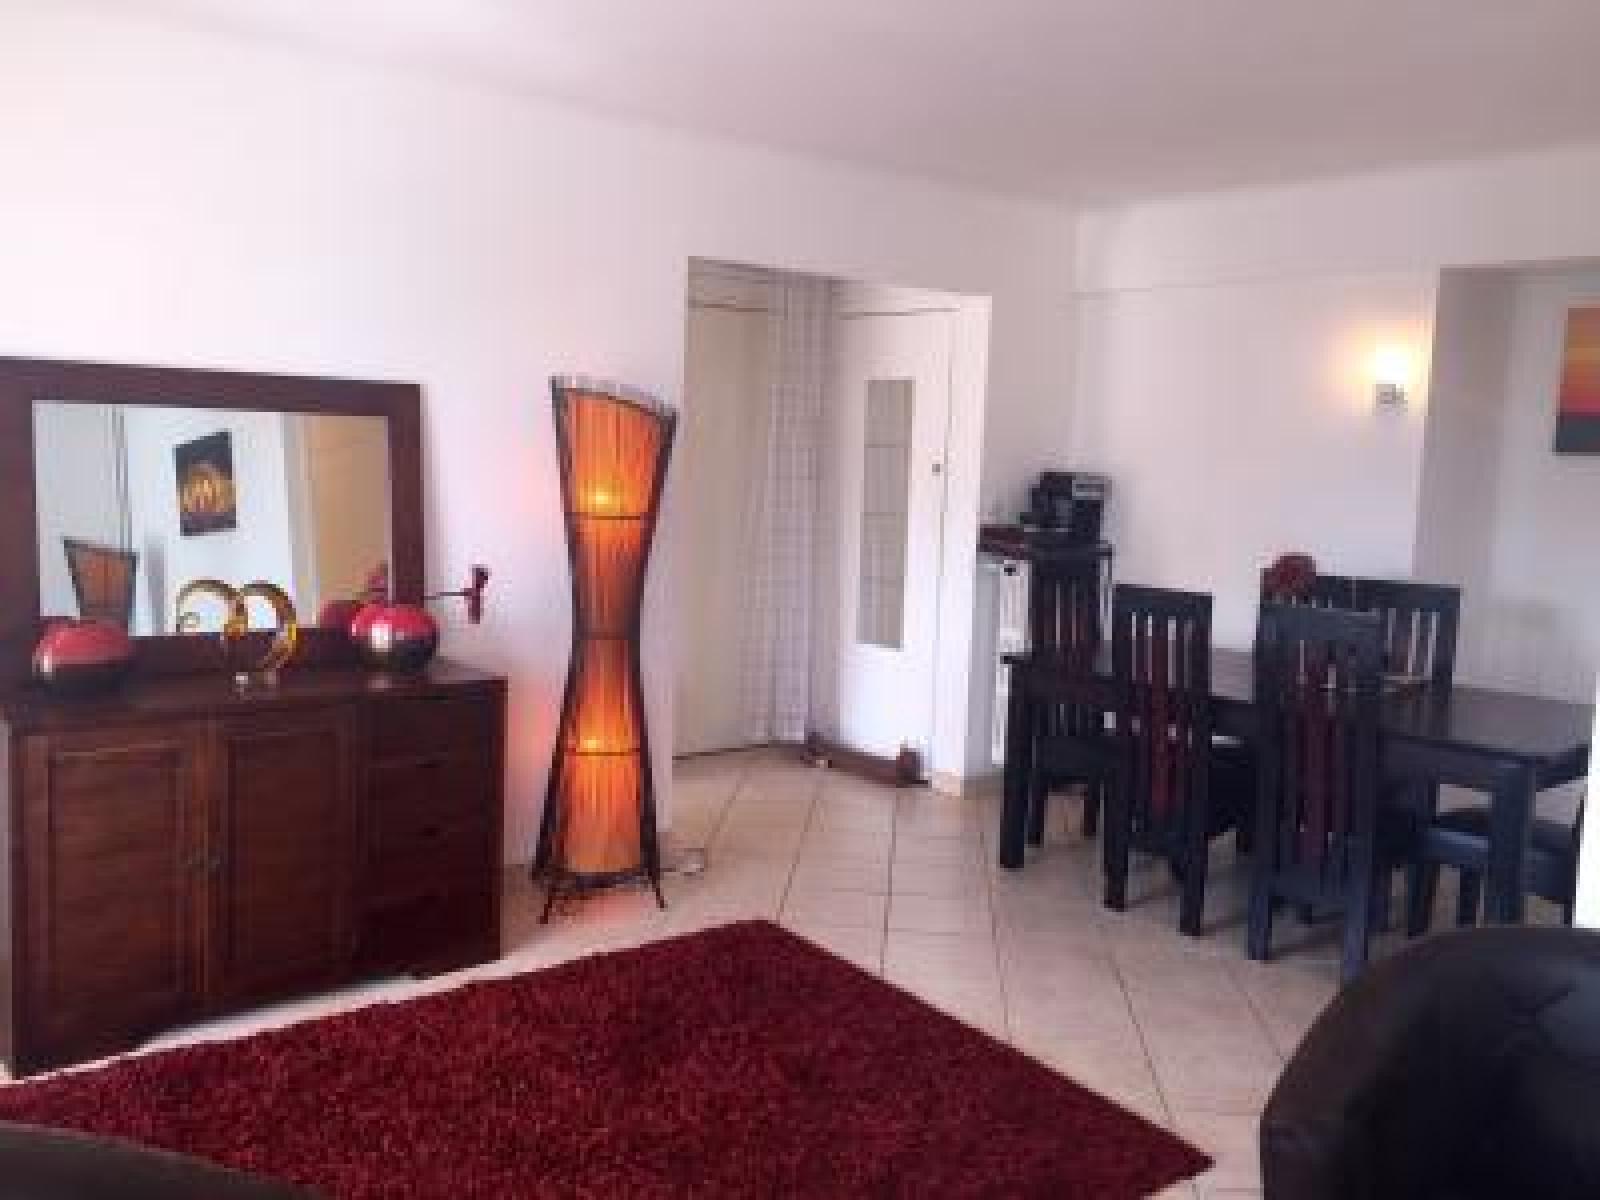 Pleasant 2 Bed Apartment in the calm Palm Beach area of Cannes with beaches nearby on all sides - 1525